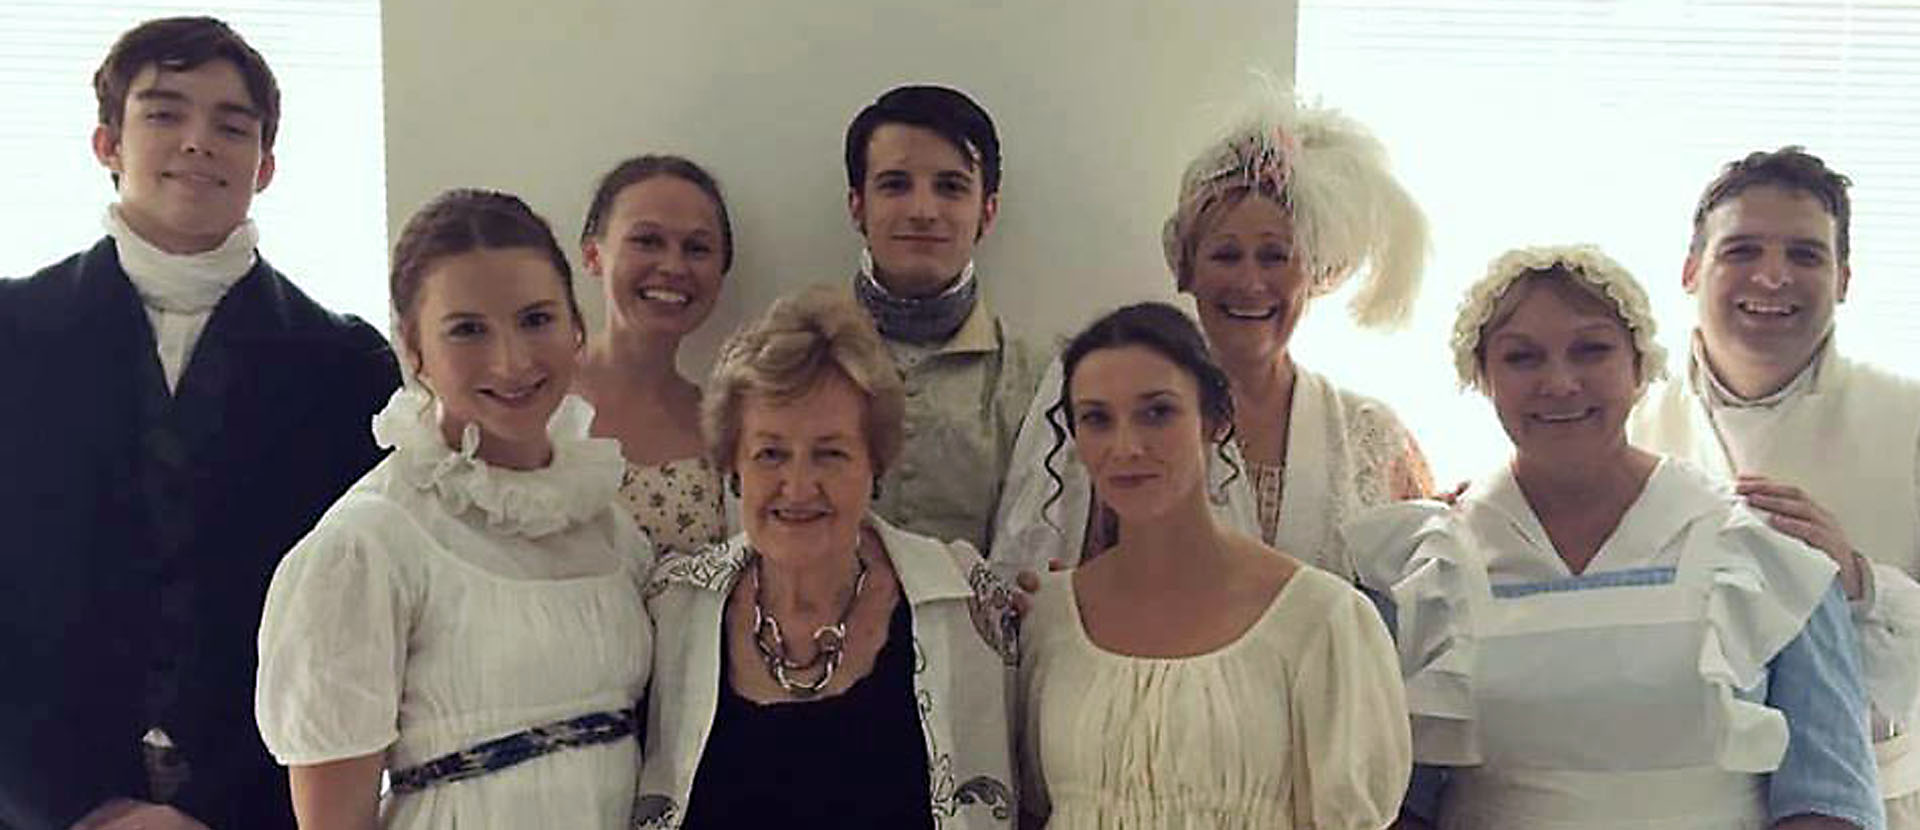 The Meeting Miss Austen cast with Maggie Tarver